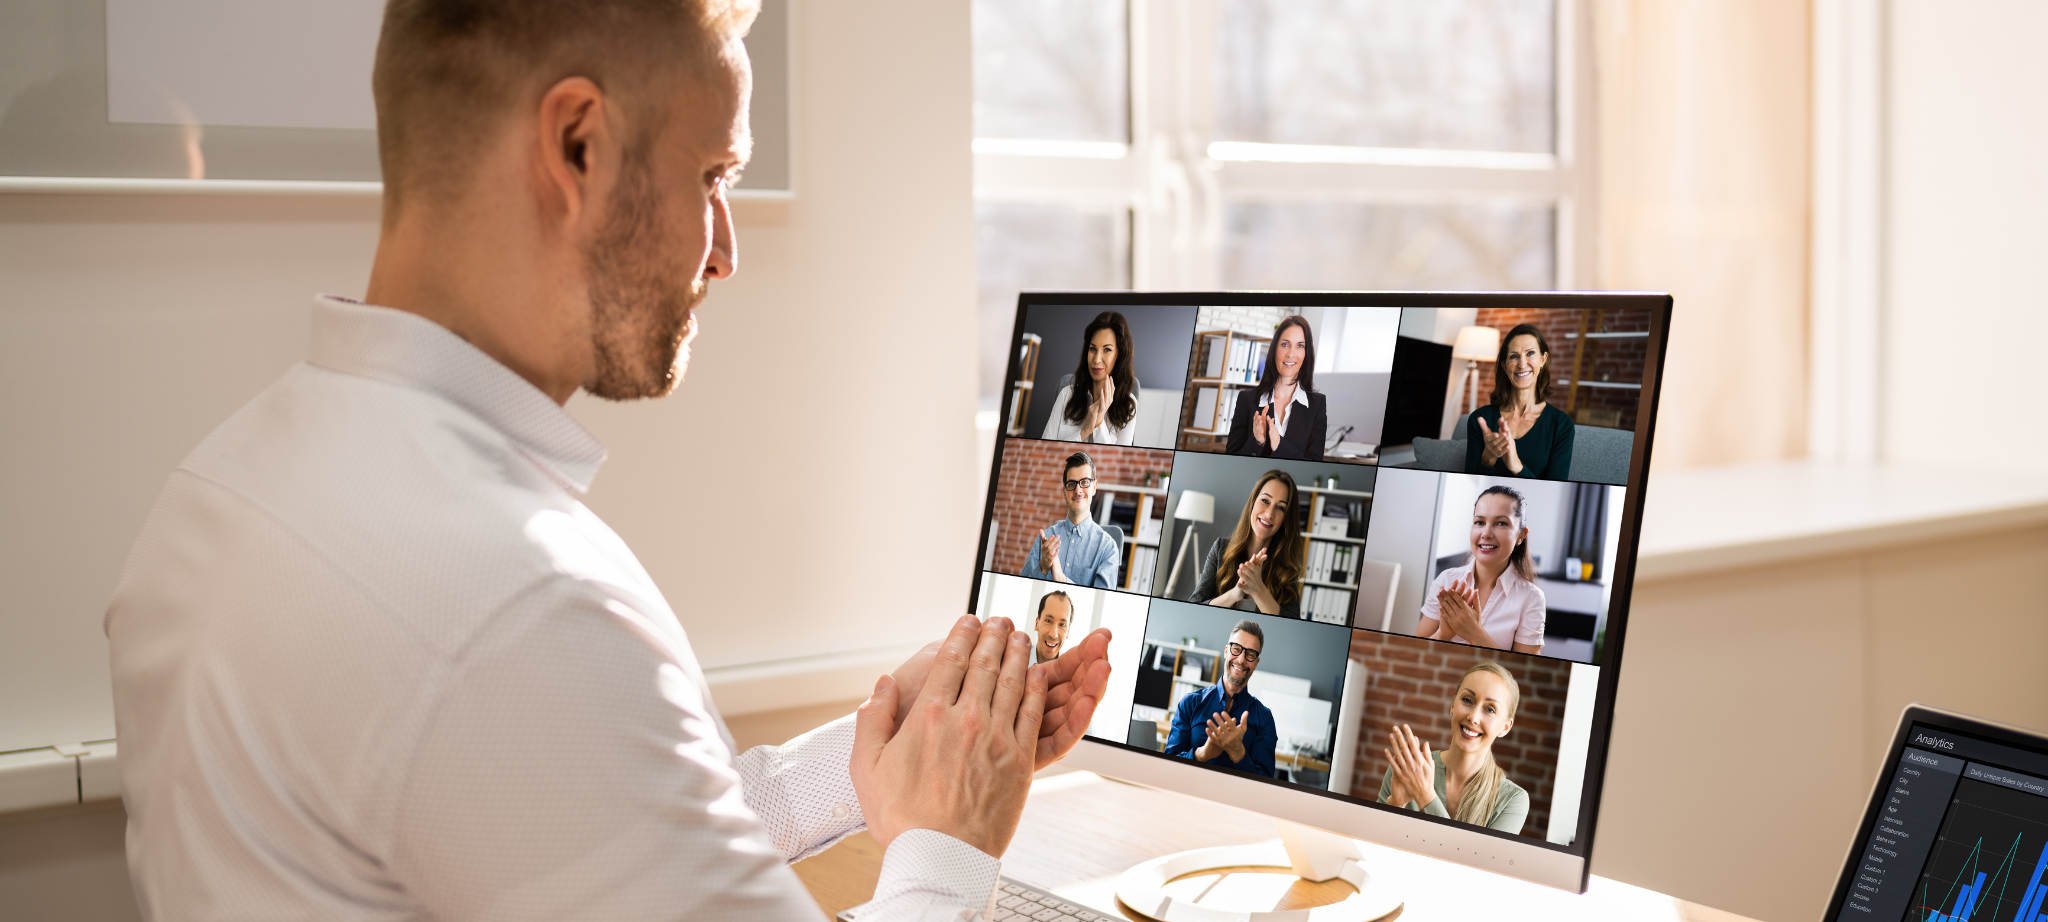 How to Conduct Successful Virtual Events